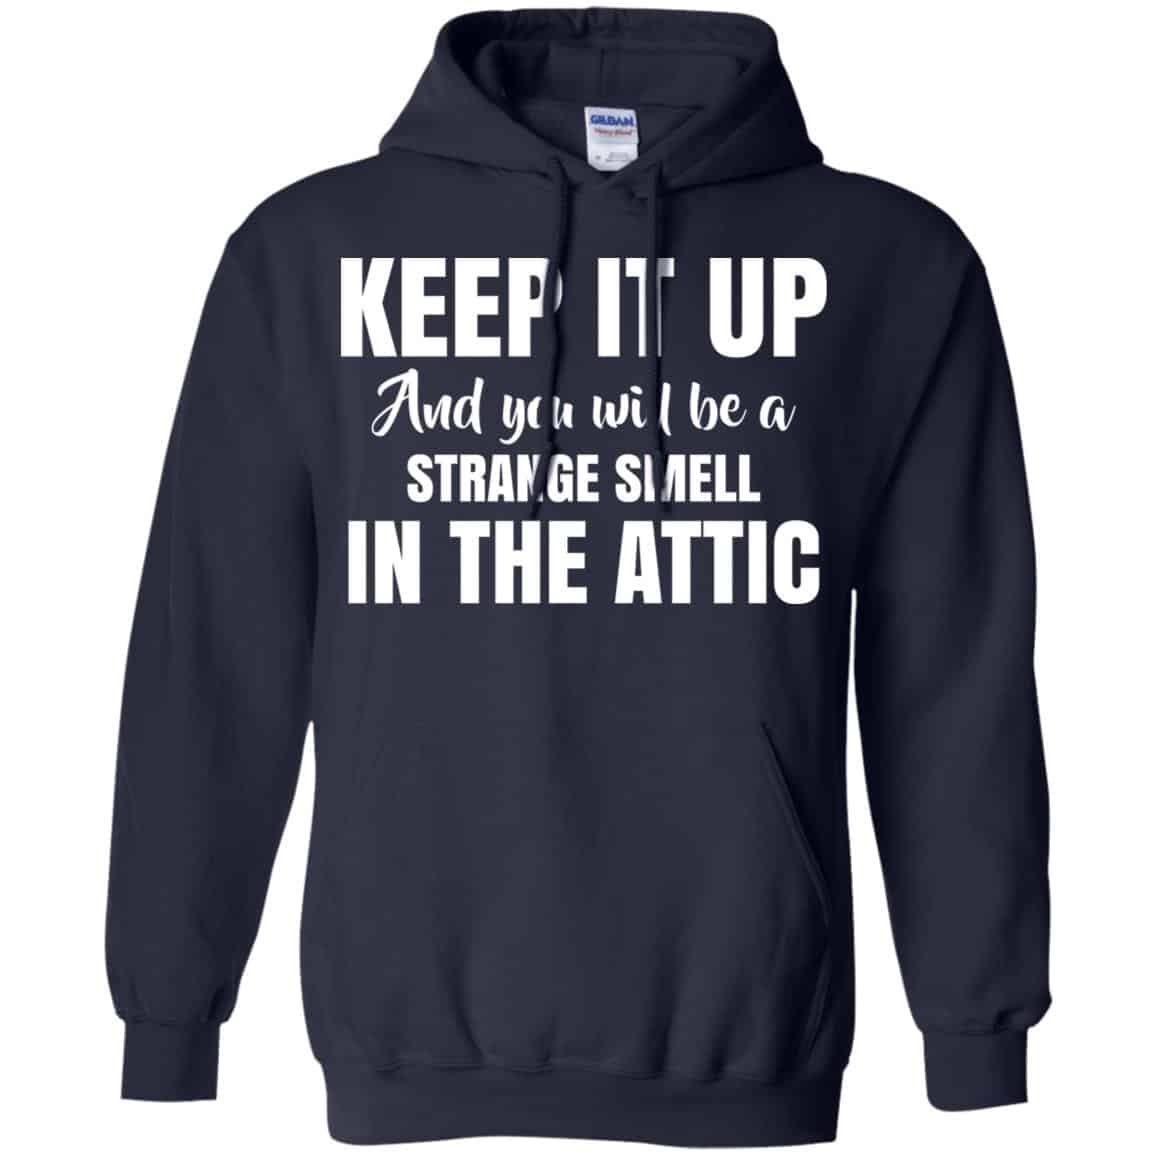 Keep It Up And You Will Be A Strange Smell In The Attic Shirt, Hoodie ...